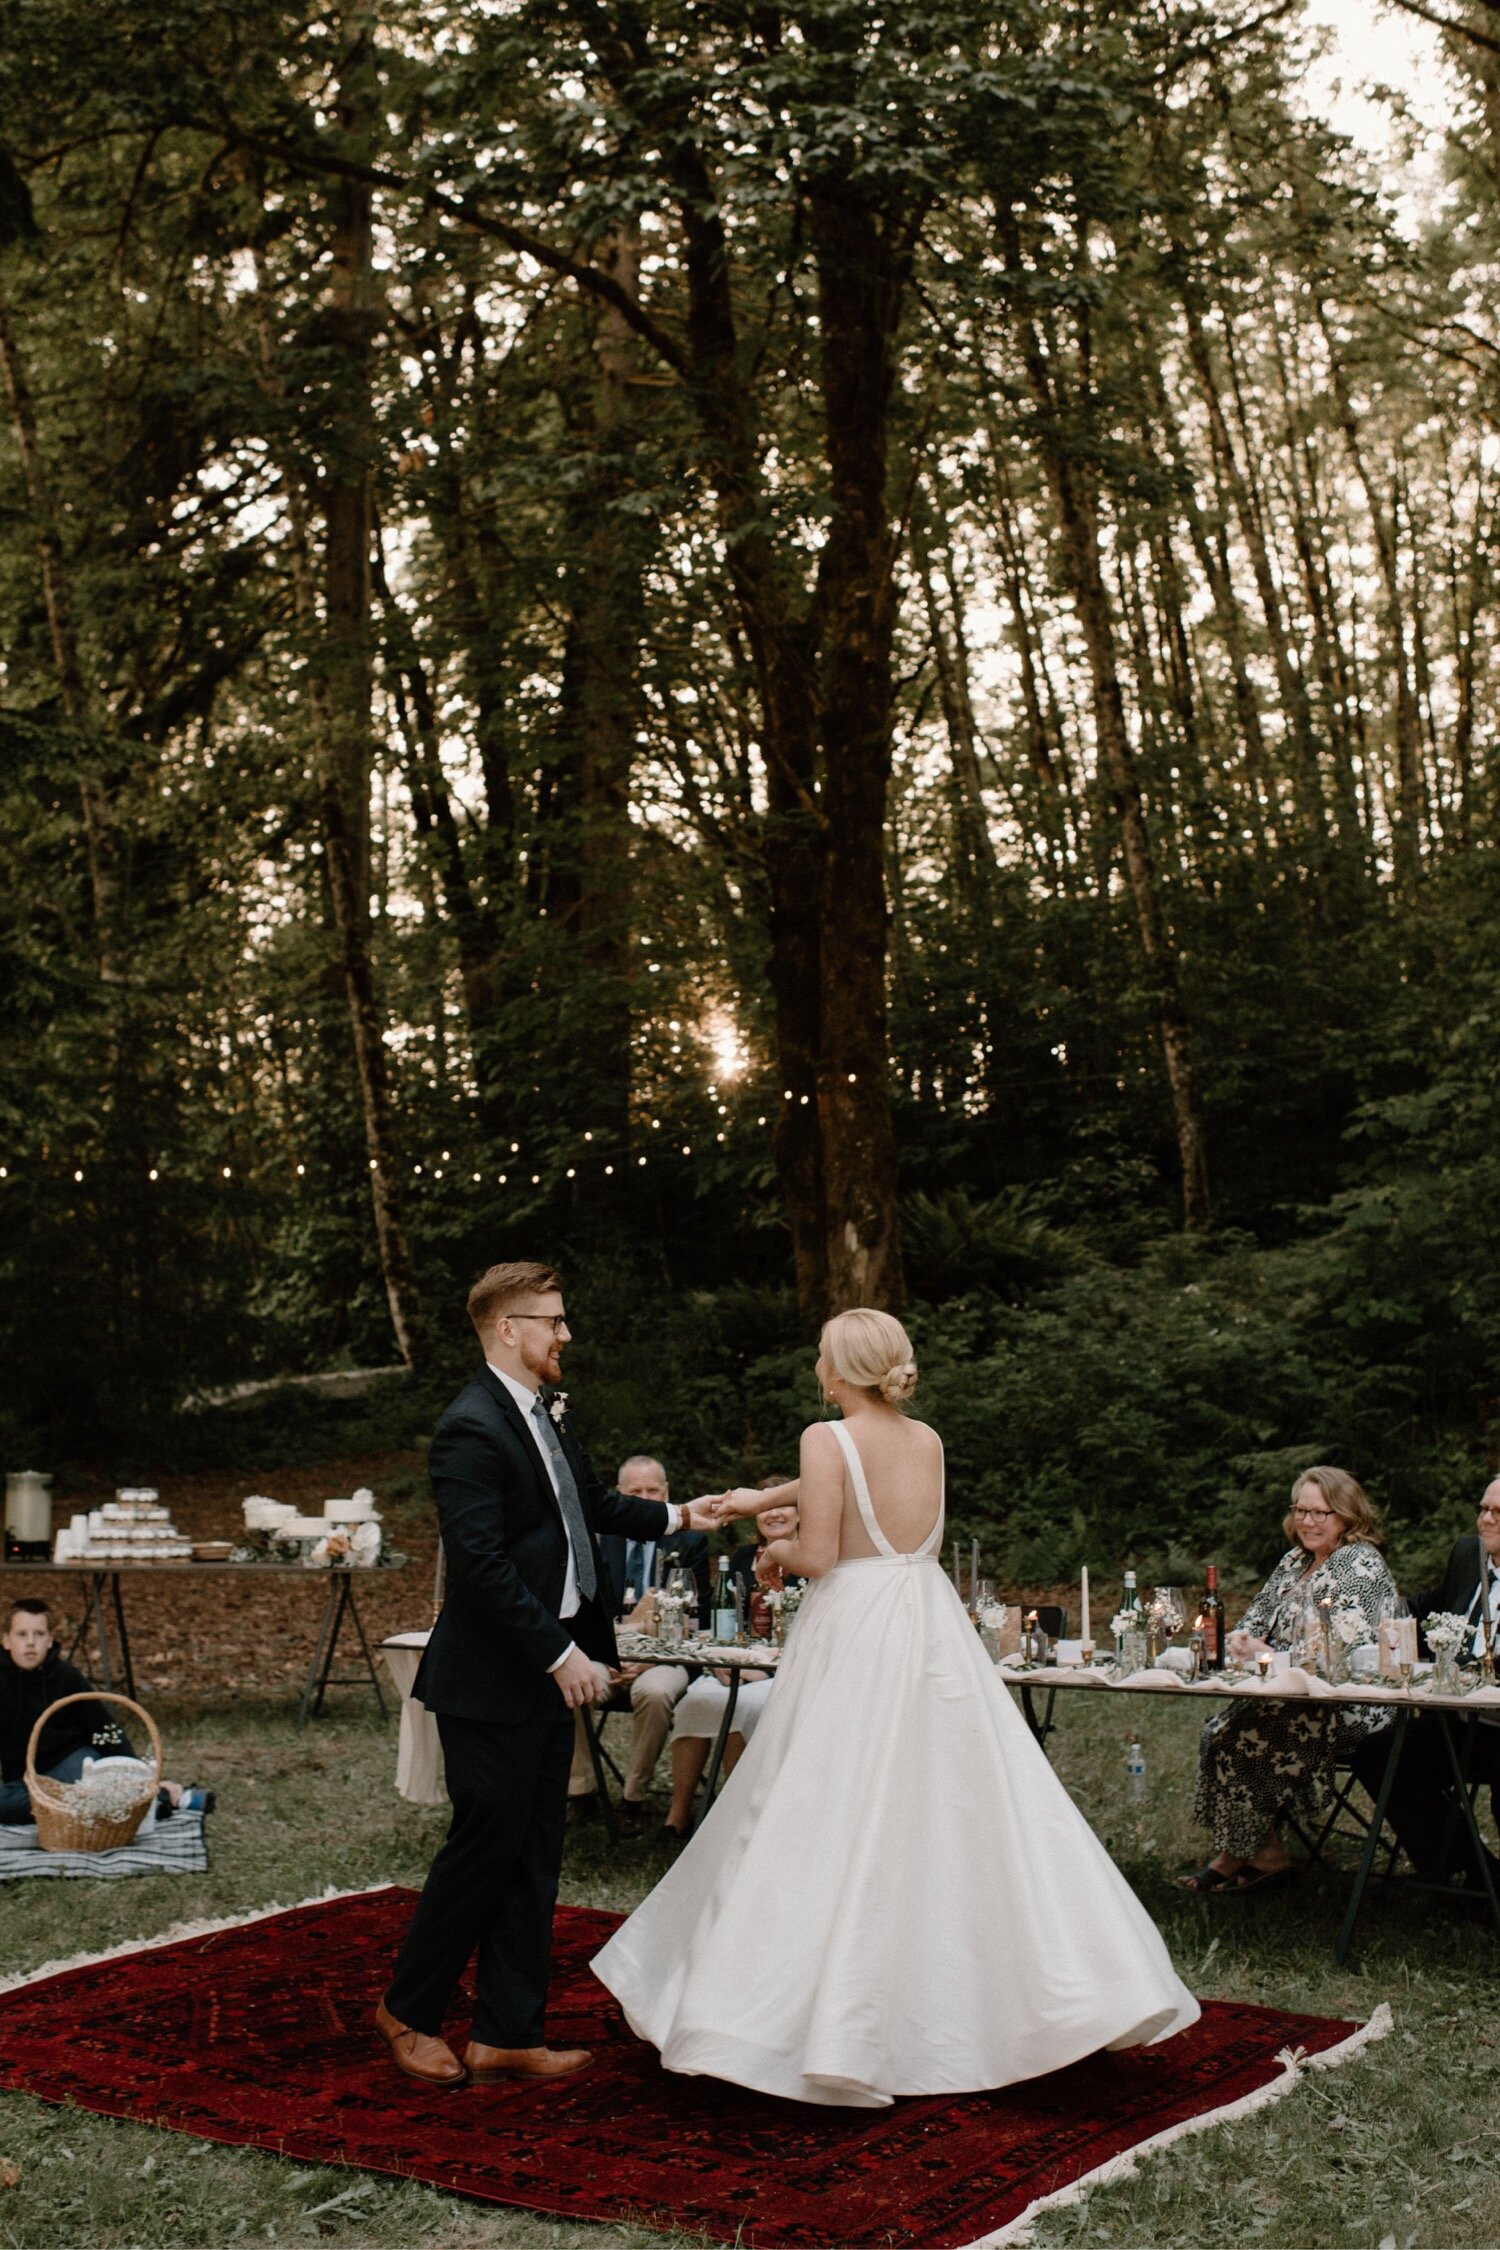 Kirané and Bryan's Washington Campground Wedding with Socially Distant Picnic Reception + DIY Details